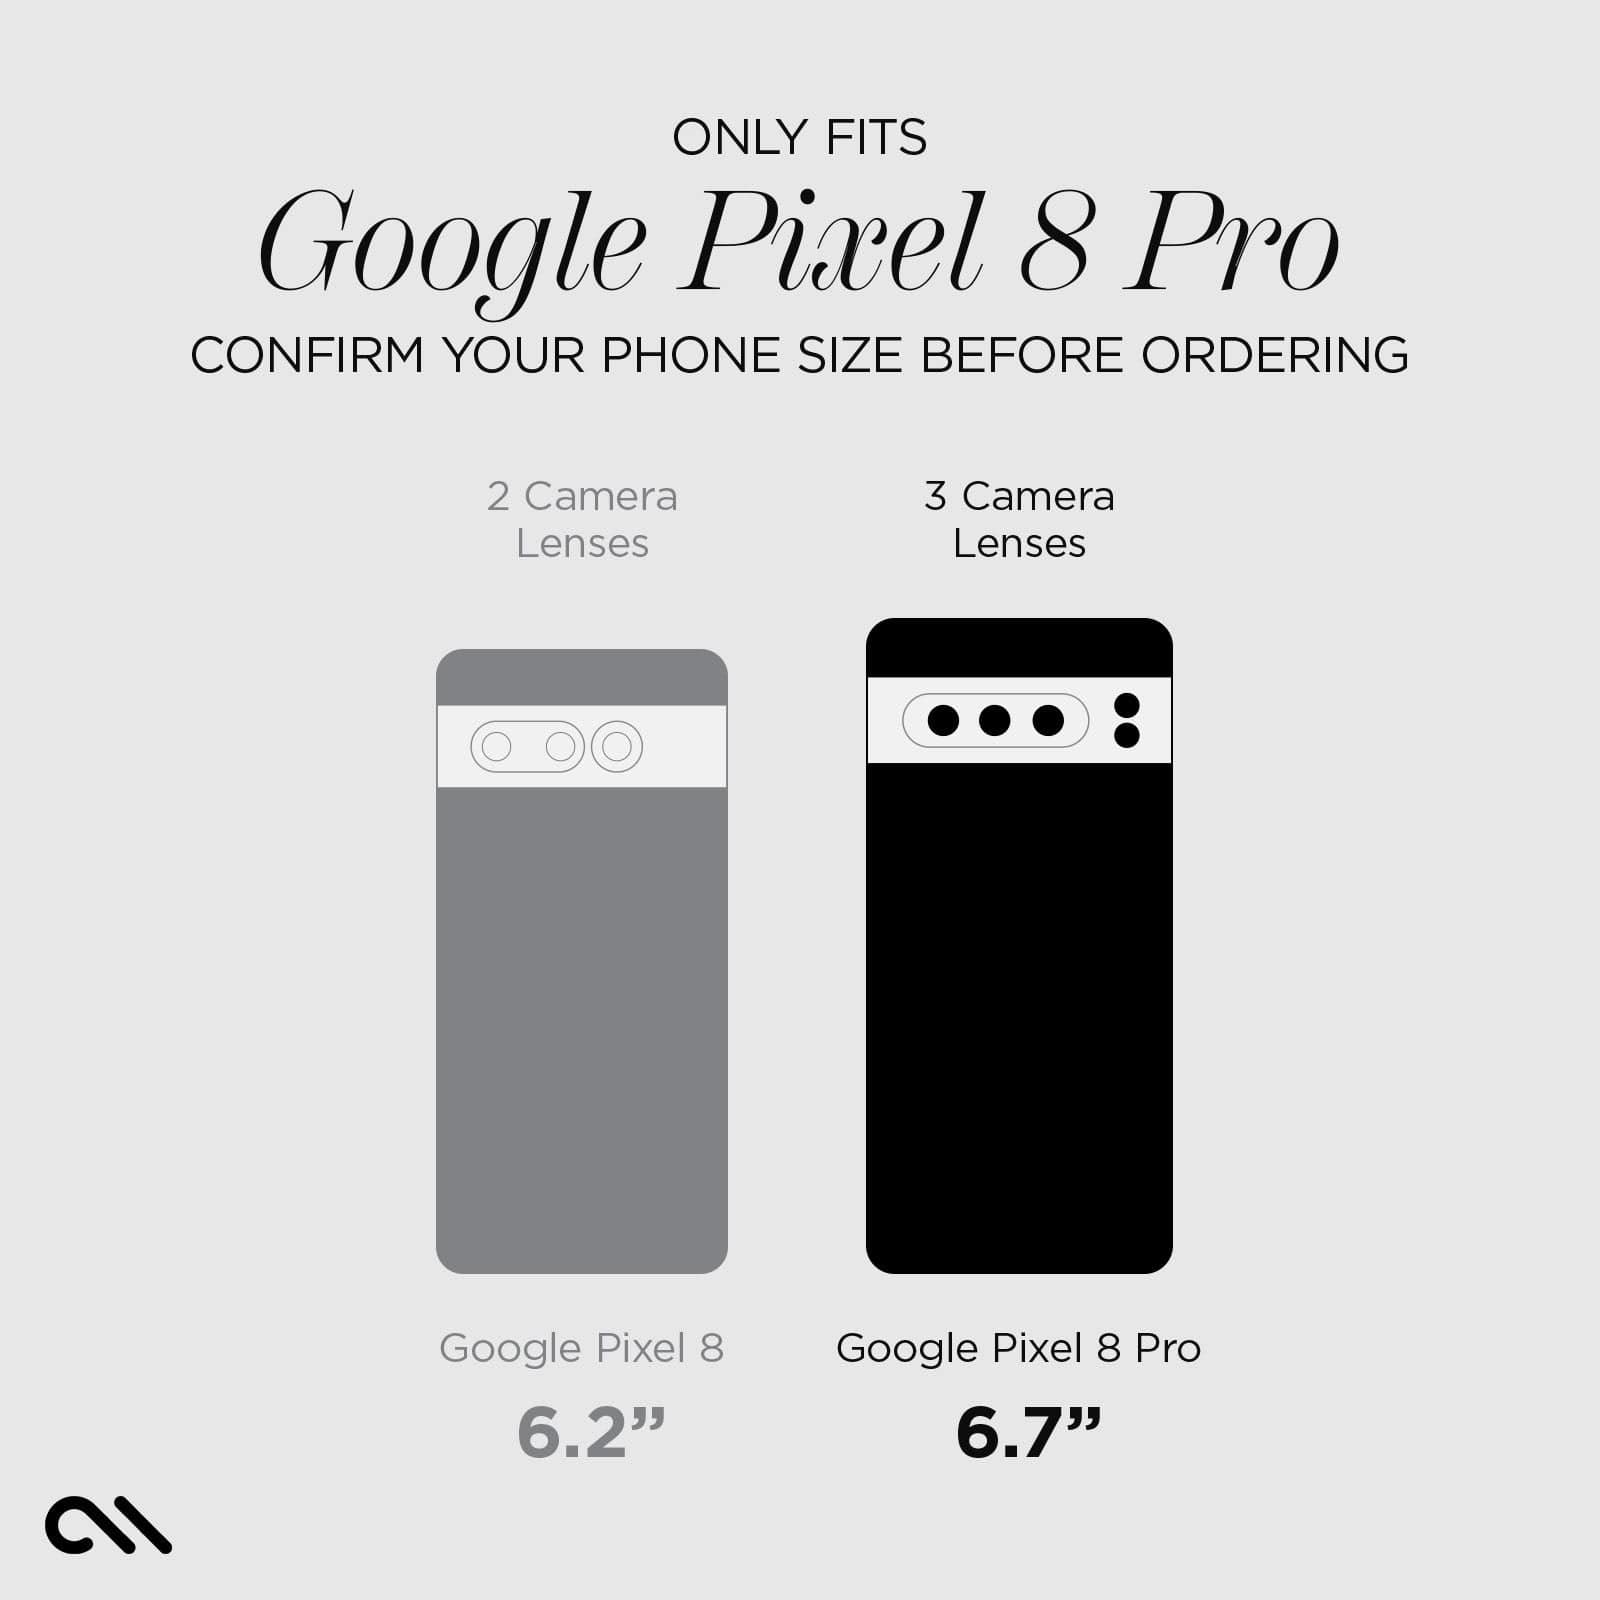 GOGLE PIXEL 8 PRO. CONFIRM YOUR PHONE SIZE BEFORE ORDERING